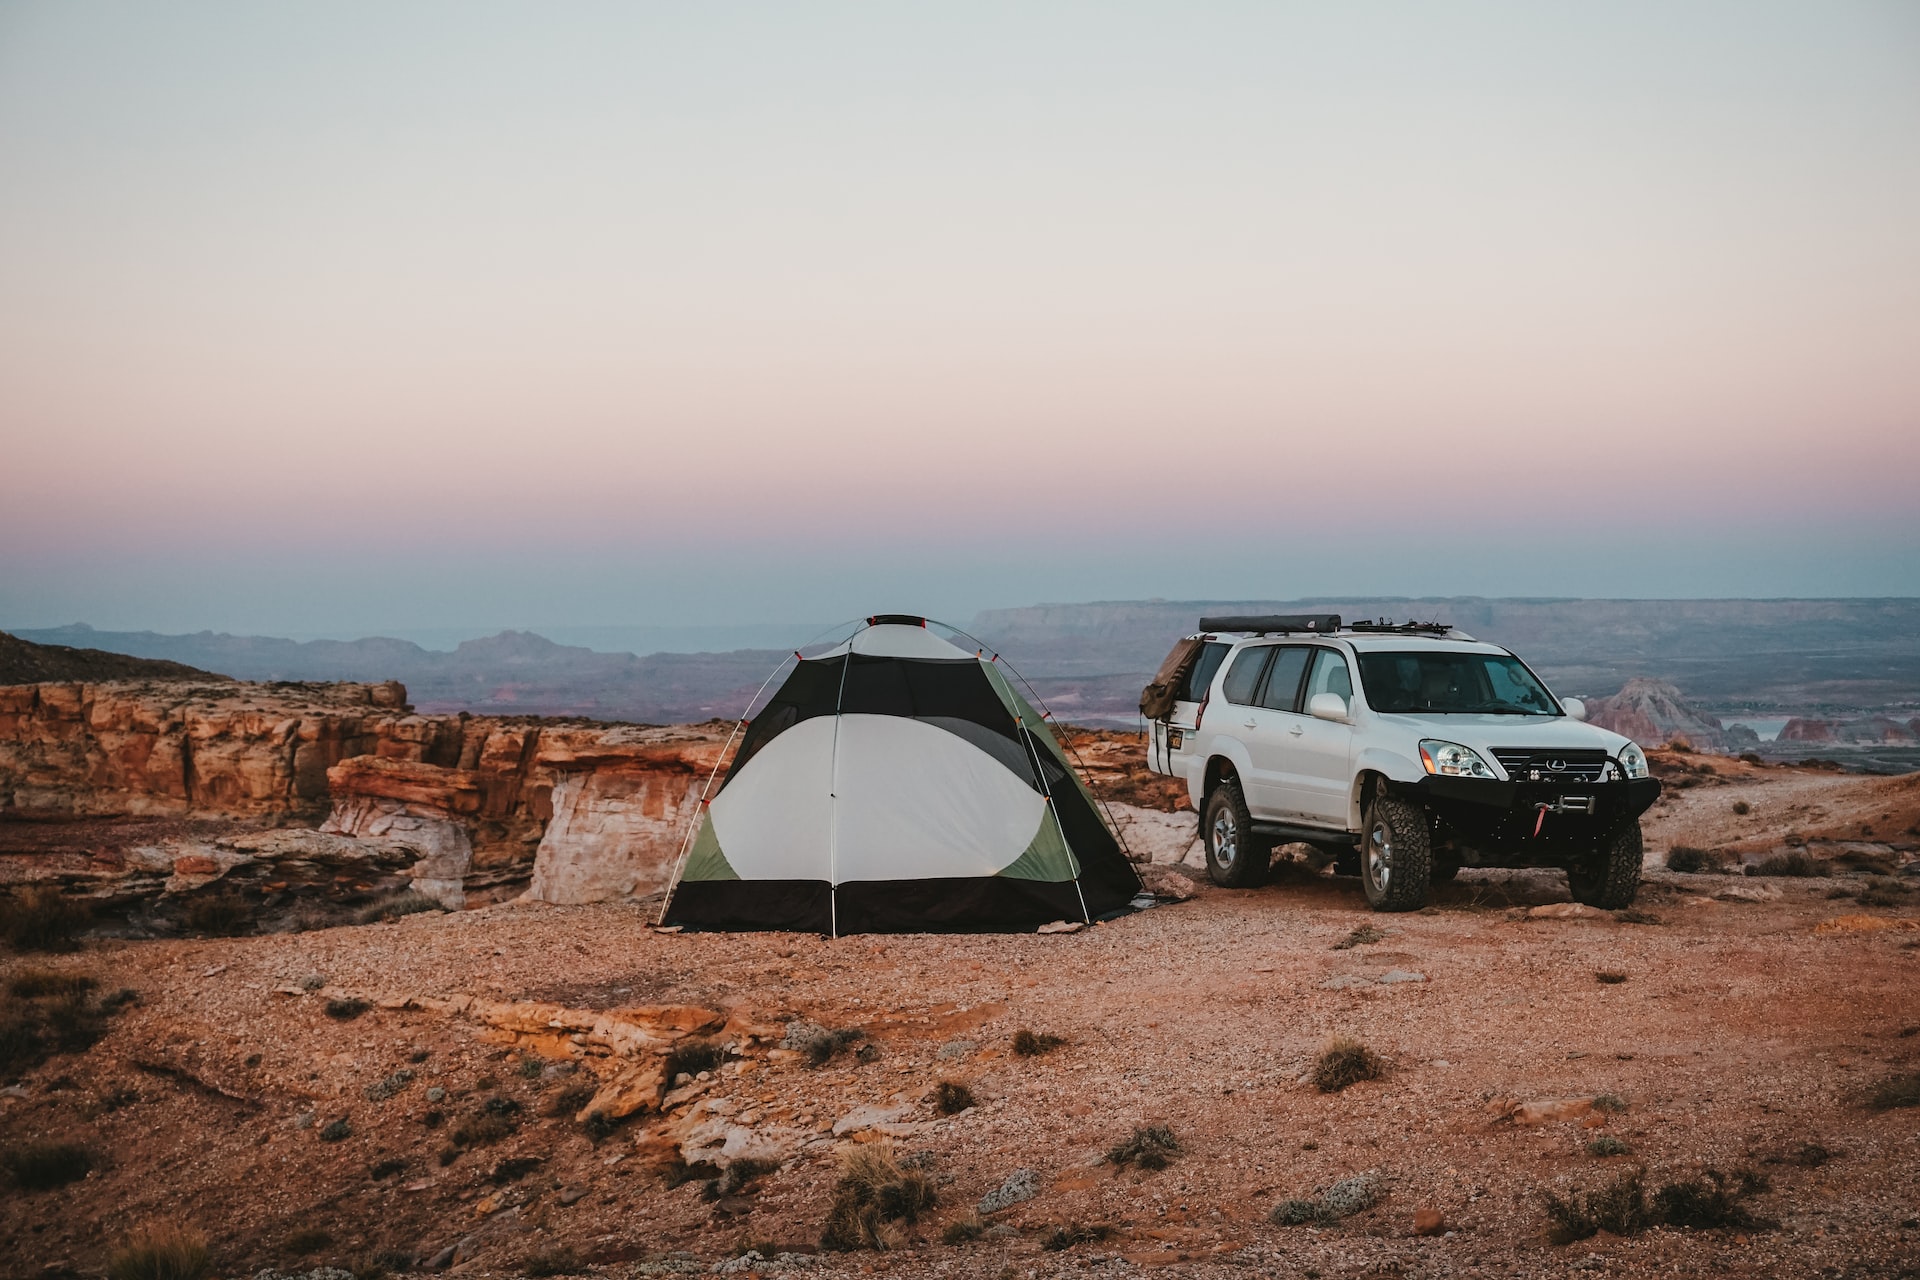 Camping in Southern Utah (photo: Christian Schrader)